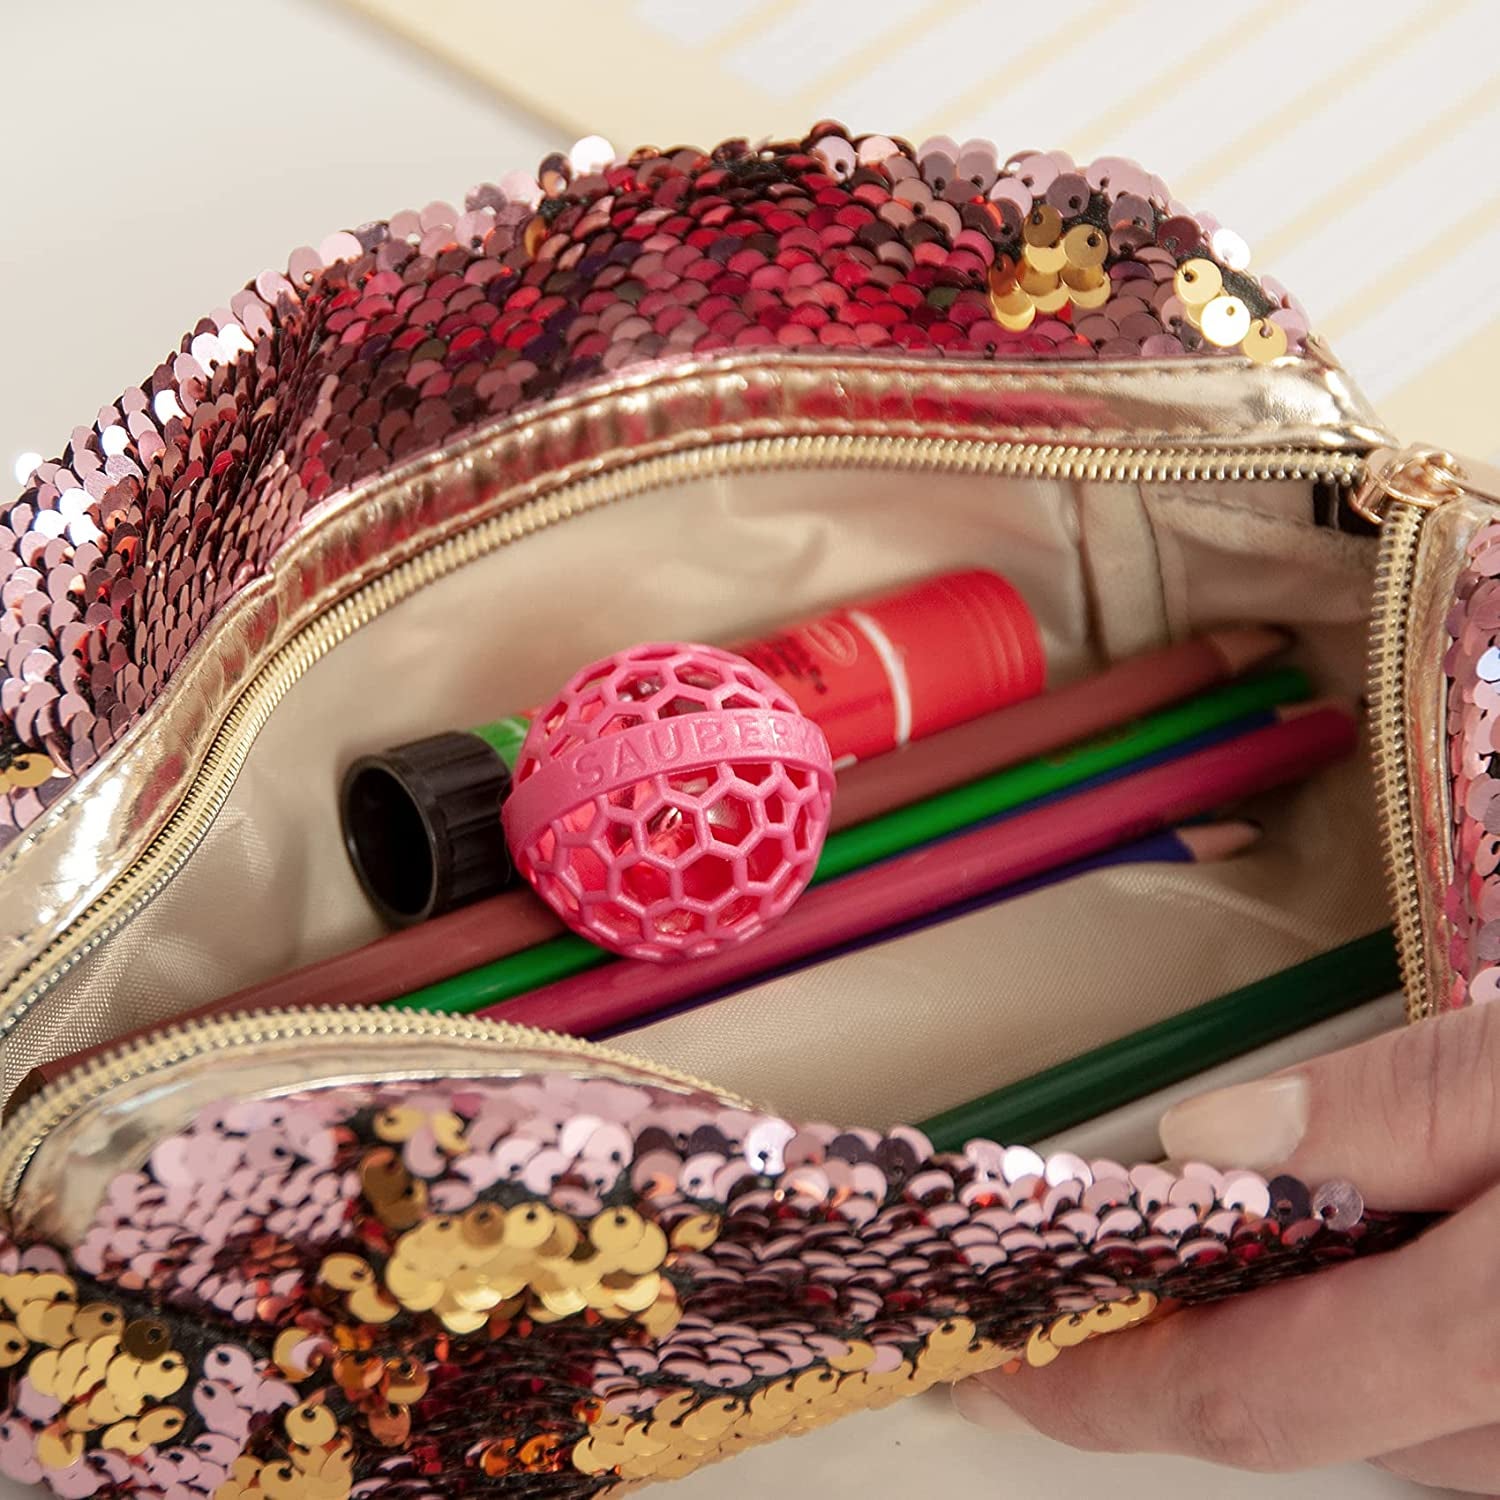 33 Things You'll Want To Throw In Your Purse